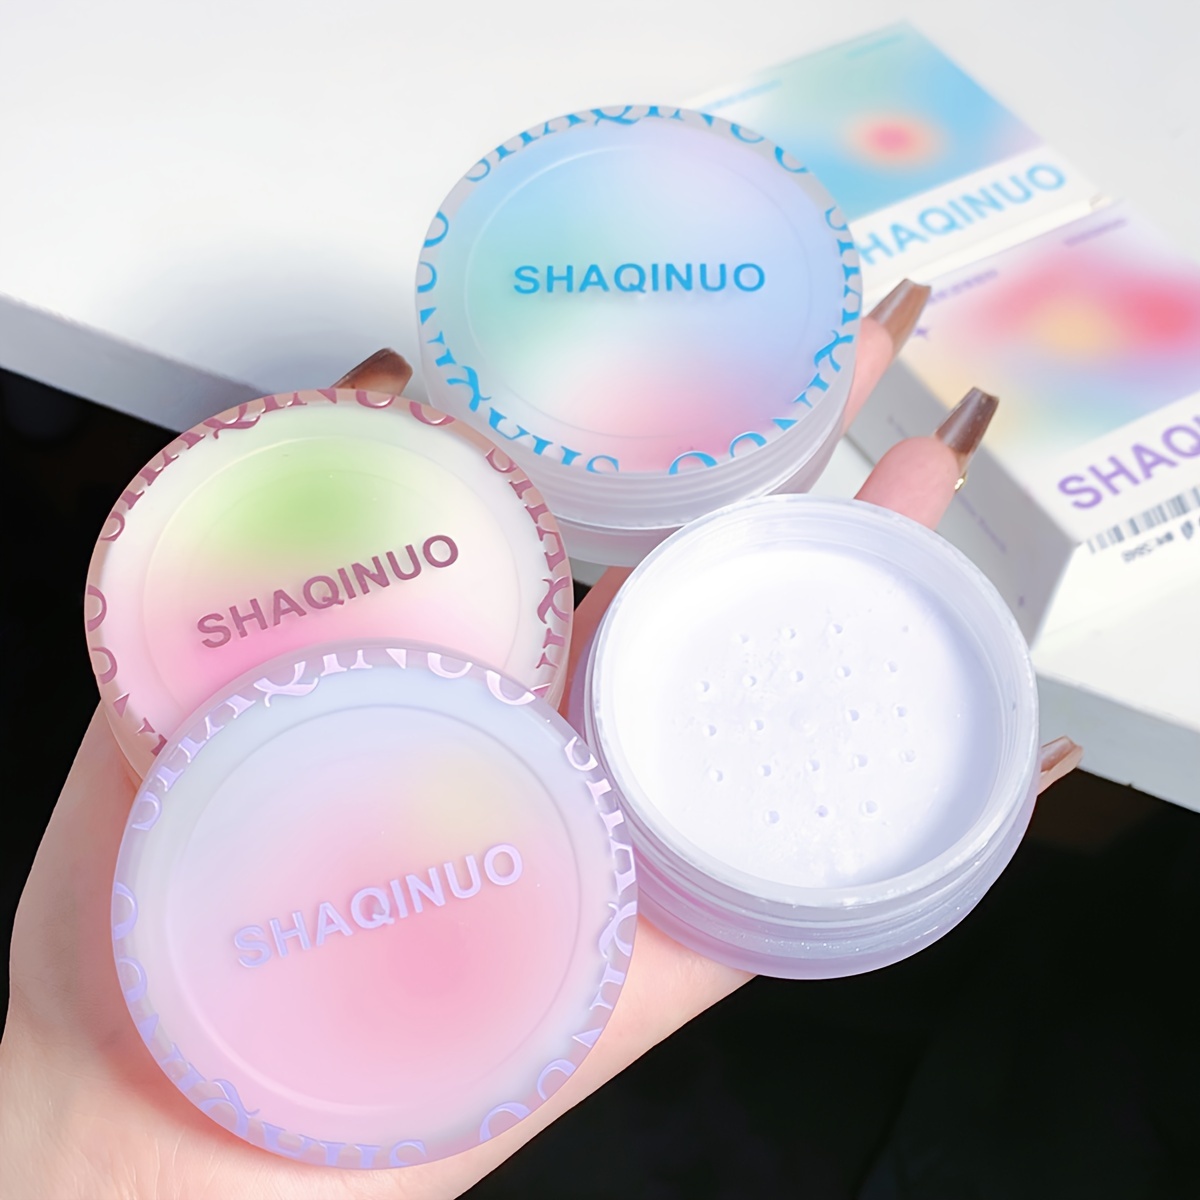 

Shaqinuo Loose Powder - Matte Finish For All Skin Tones, Natural Filter Effect, Lightweight Oil Control, Waterproof Setting Powder For All Skin Types